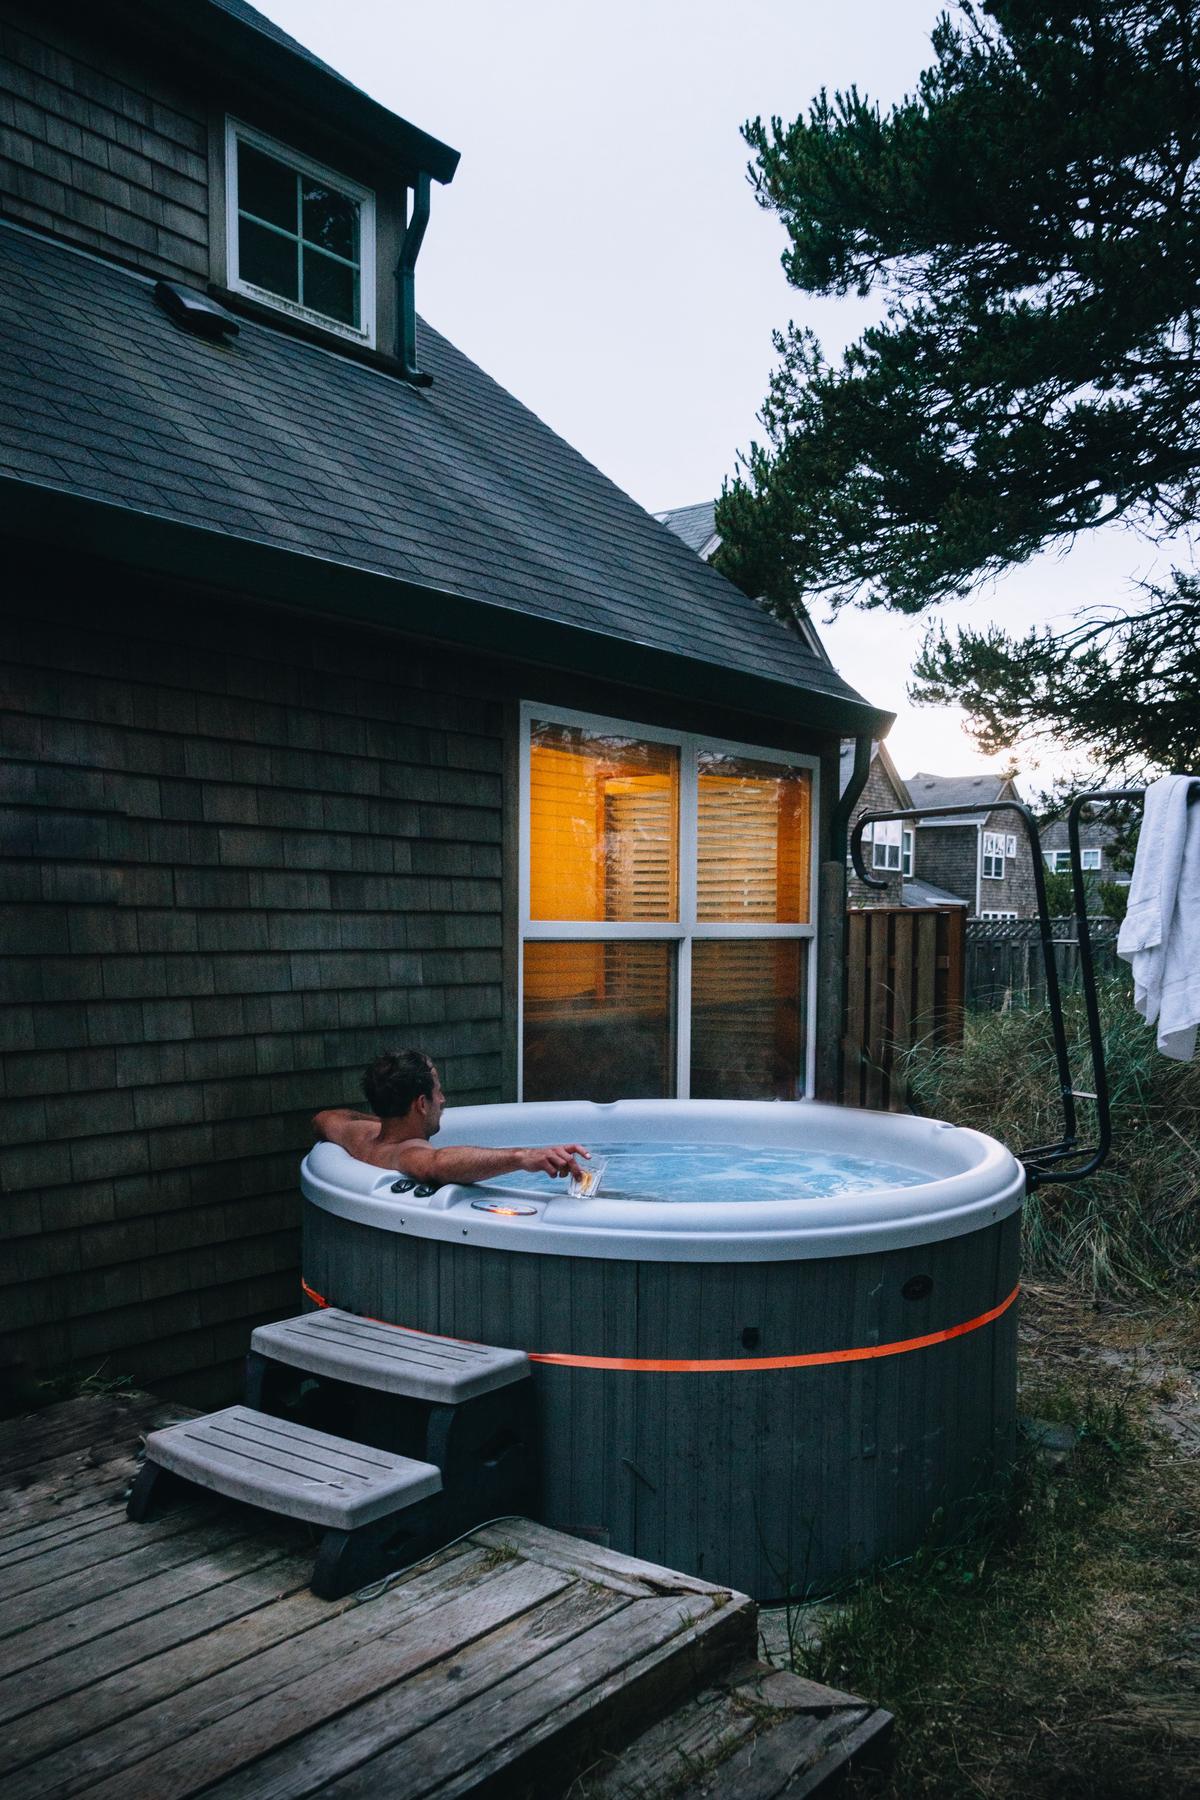 Image of portable hot tubs in a backyard setting